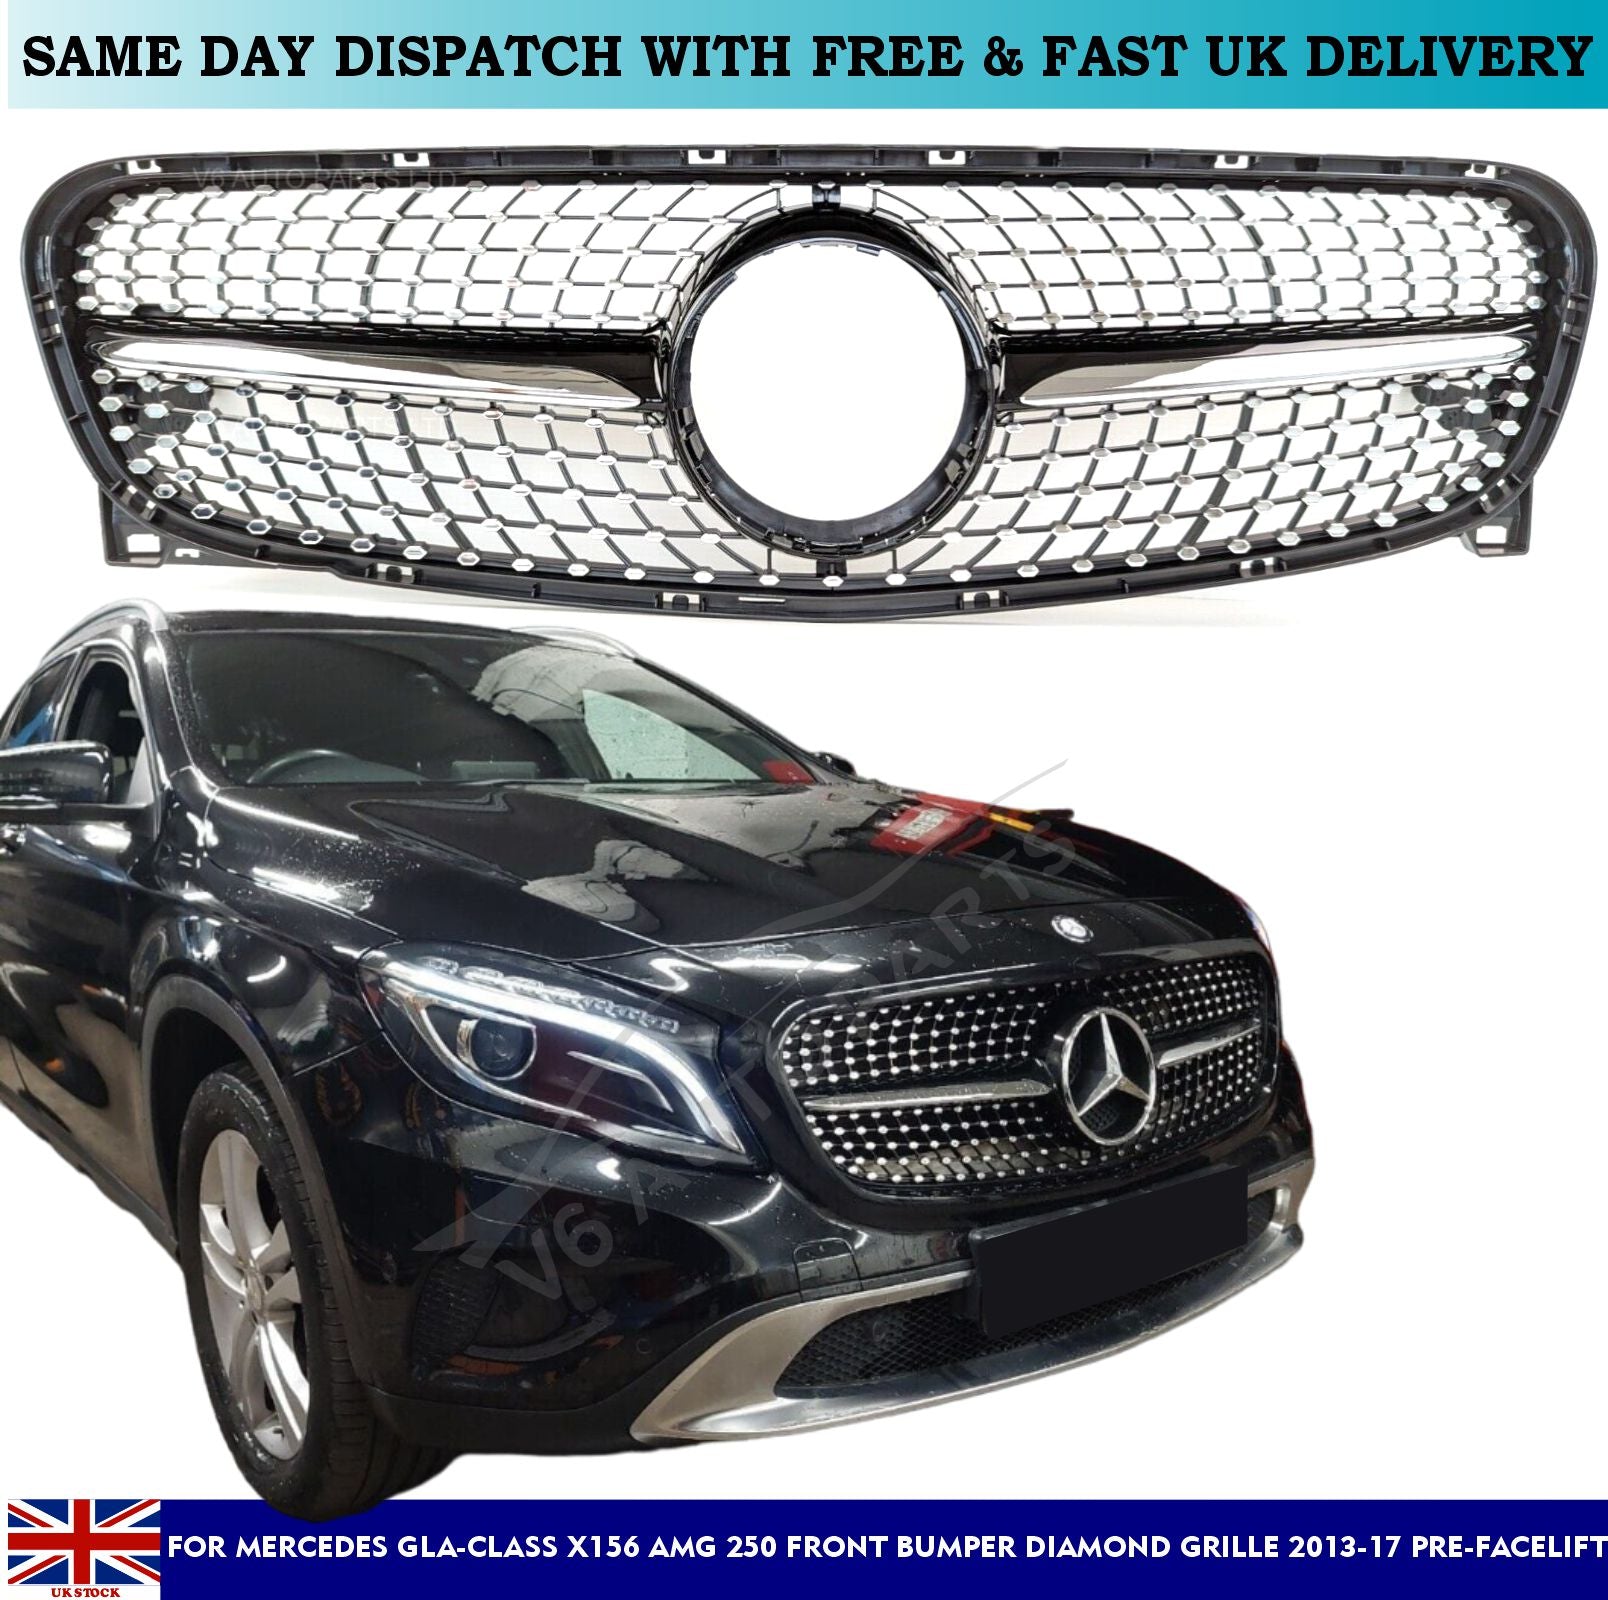 For Mercedes GLA-Class X156 AMG 45 Front Bumper Diamond Grille 2013-17 Pre-Facelift